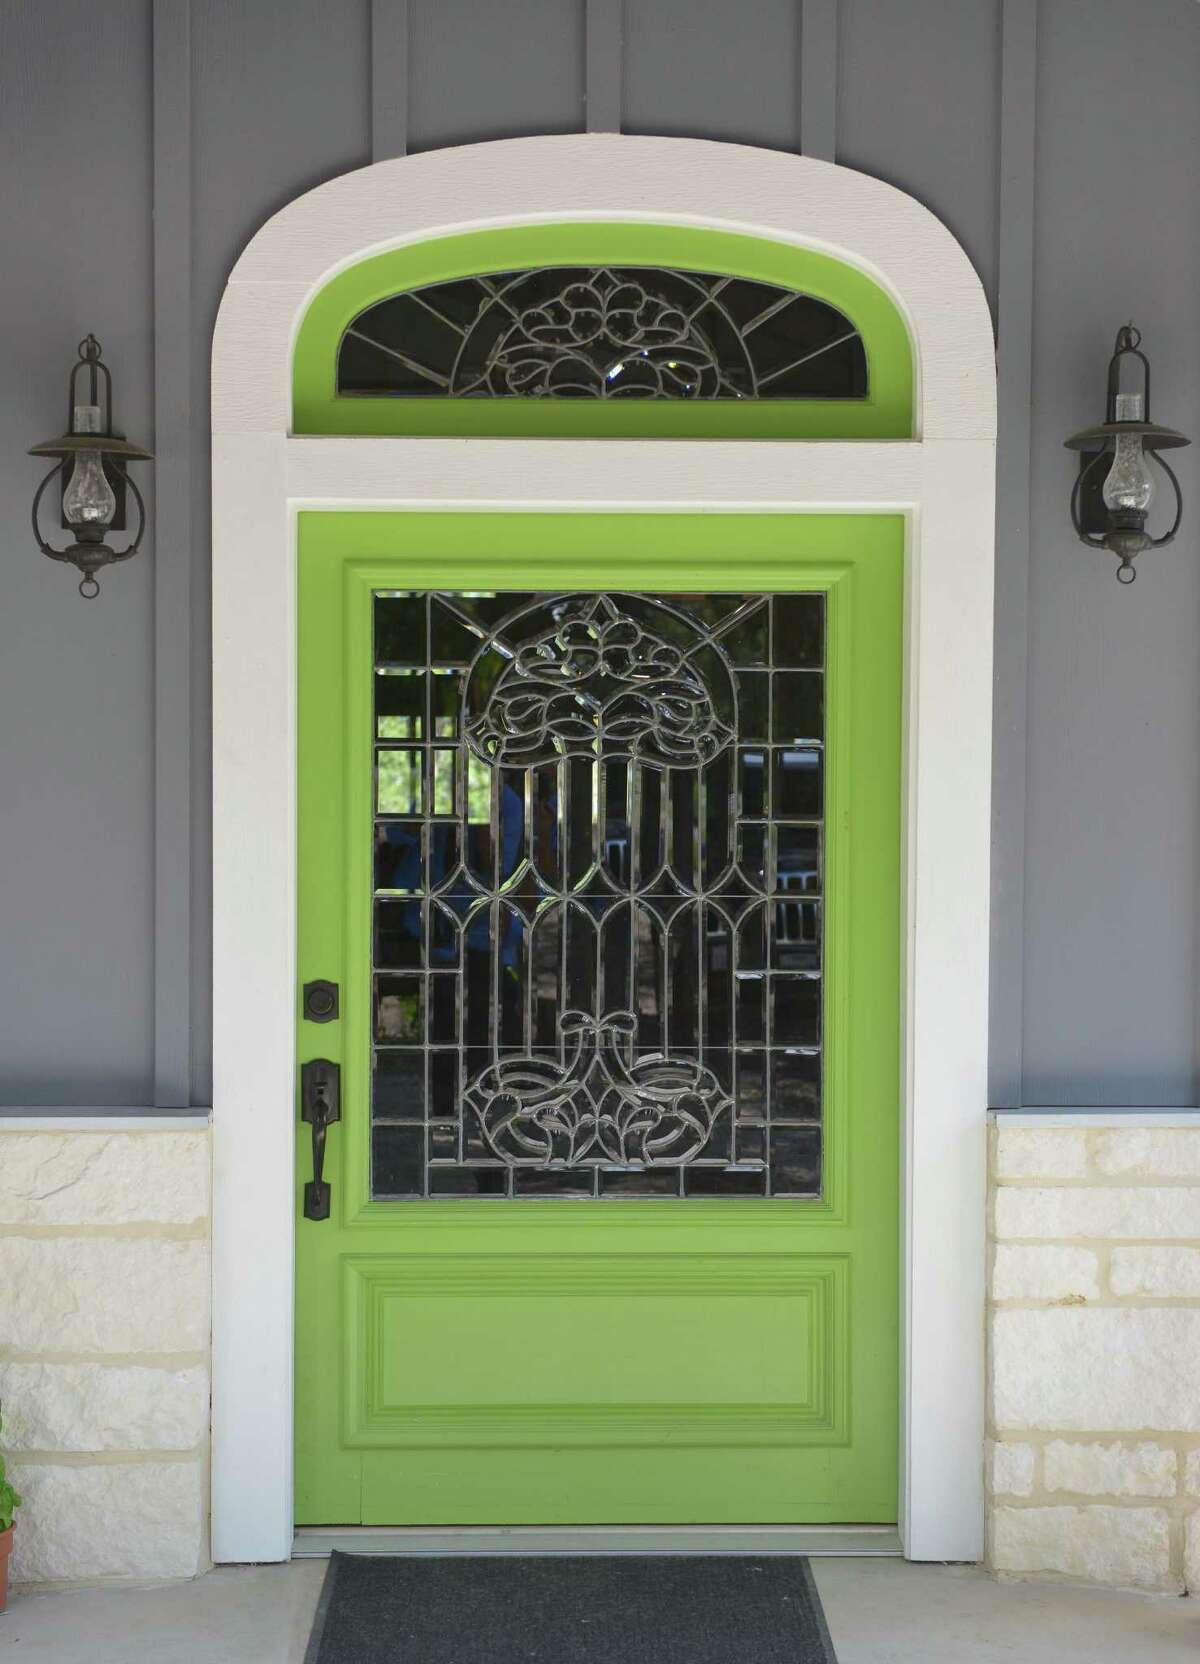 Tricia and Jeff Zunker found their front door at a salvage company and had the leaded glass in it restored.